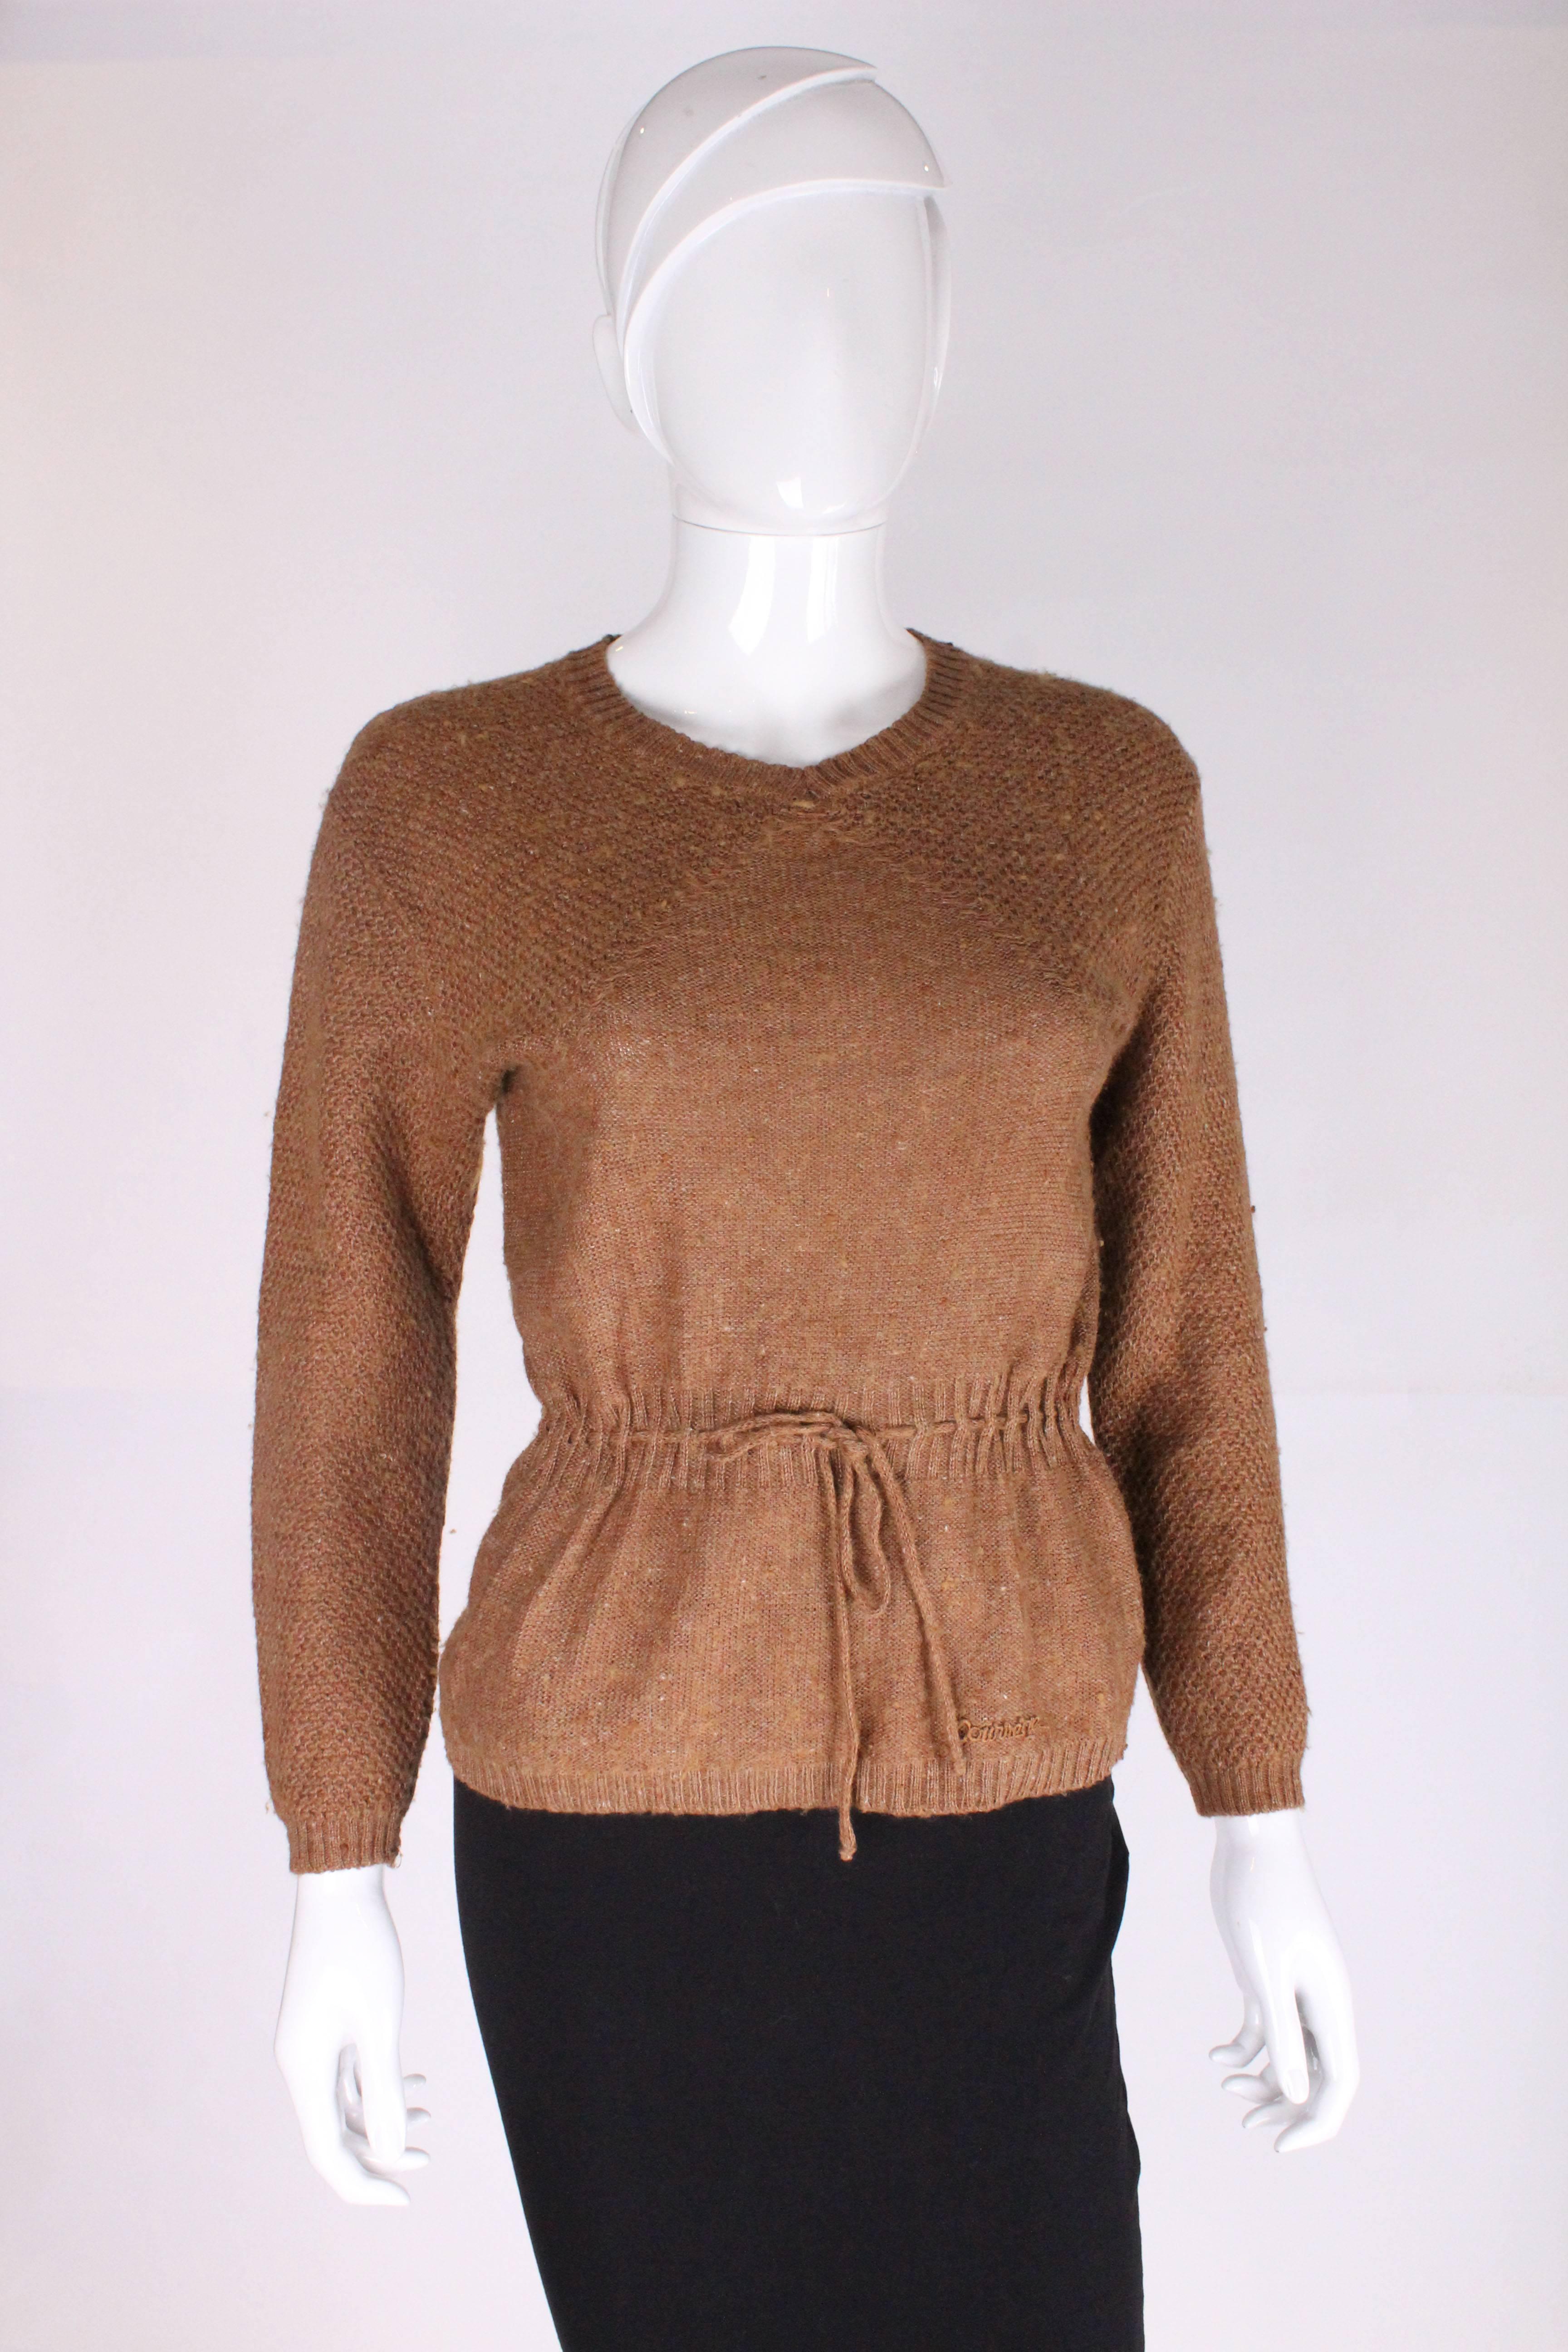 A great jumper by French designer Andre Courreges. In a tobacco brown wool  mix,this jumper has a v neckline, and drawstring waist.There is honeycomb stitch detail on the sleeve and yoke, and Courreges applique on the lower left side.